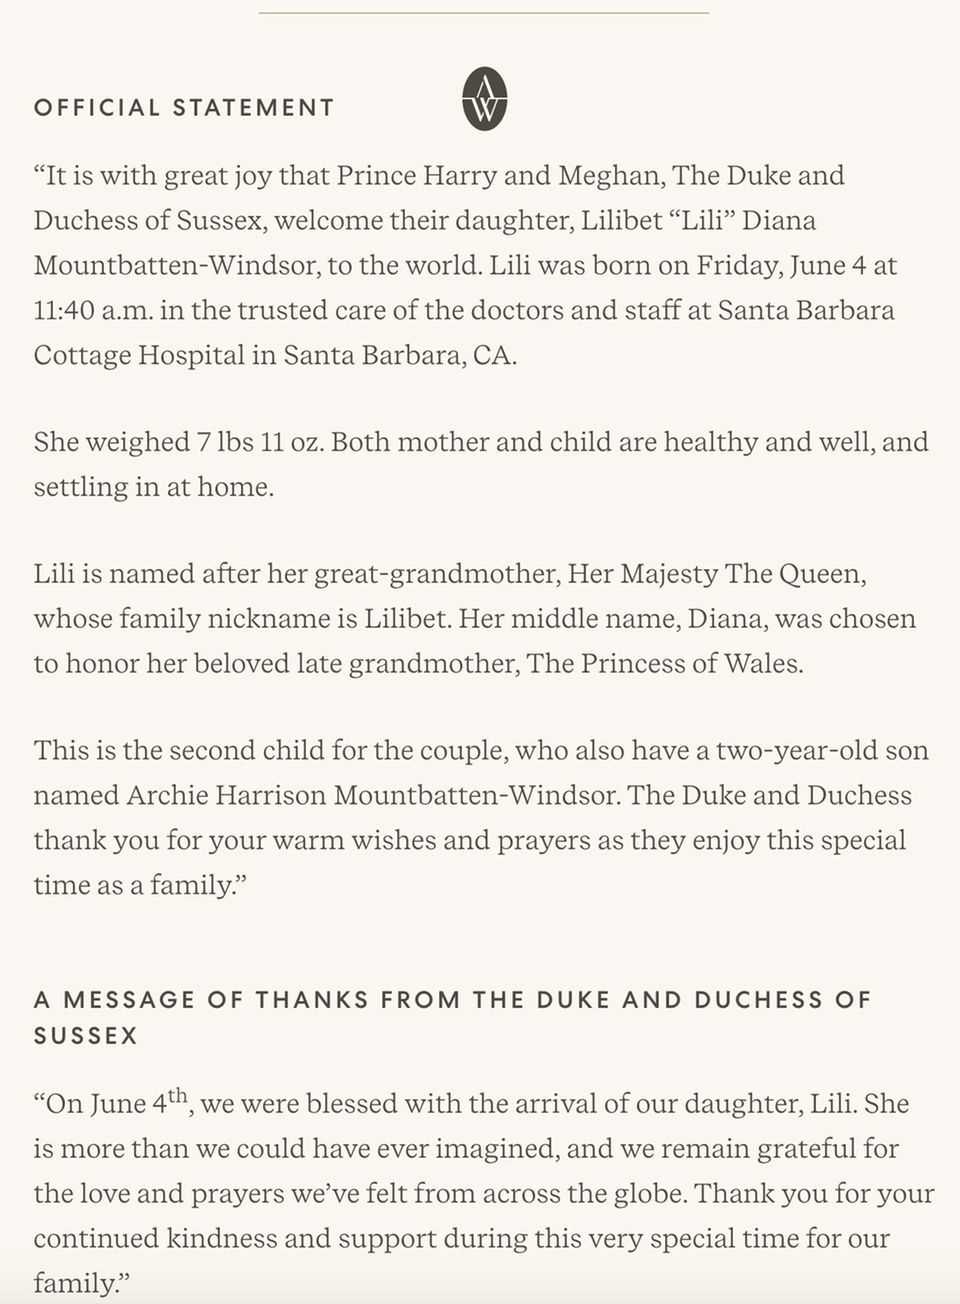 On the official website of their "Archewell Foundation" let Prince Harry and Duchess Meghan announce the birth of their daughter and address words of thanks to the people.